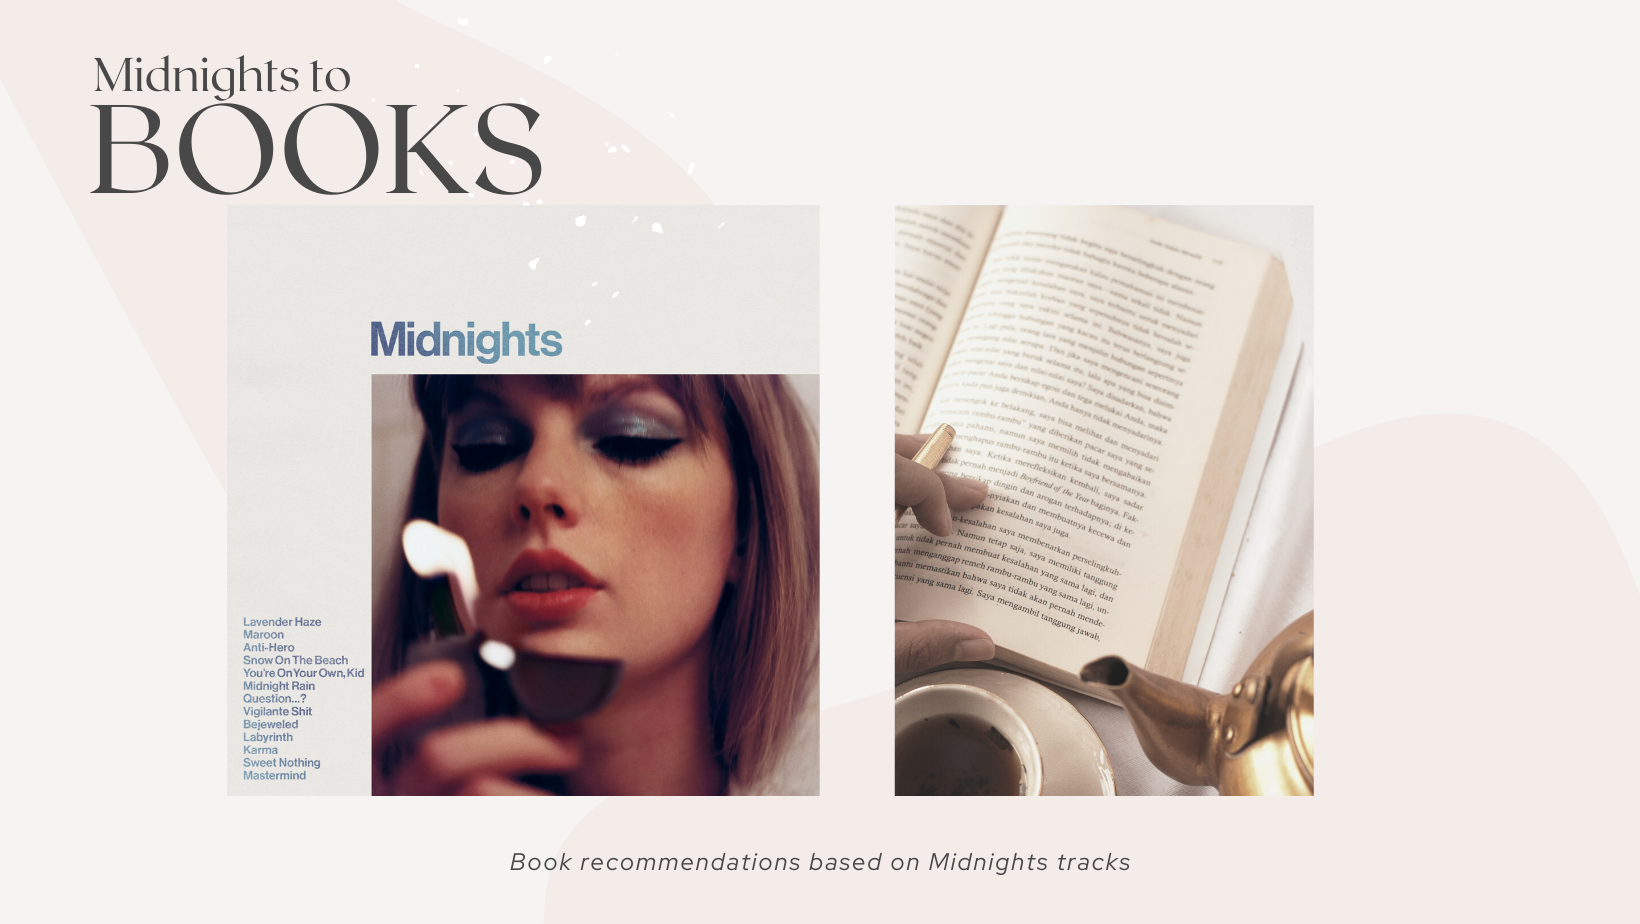 Taylor Swift's Midnights album cover and an open book